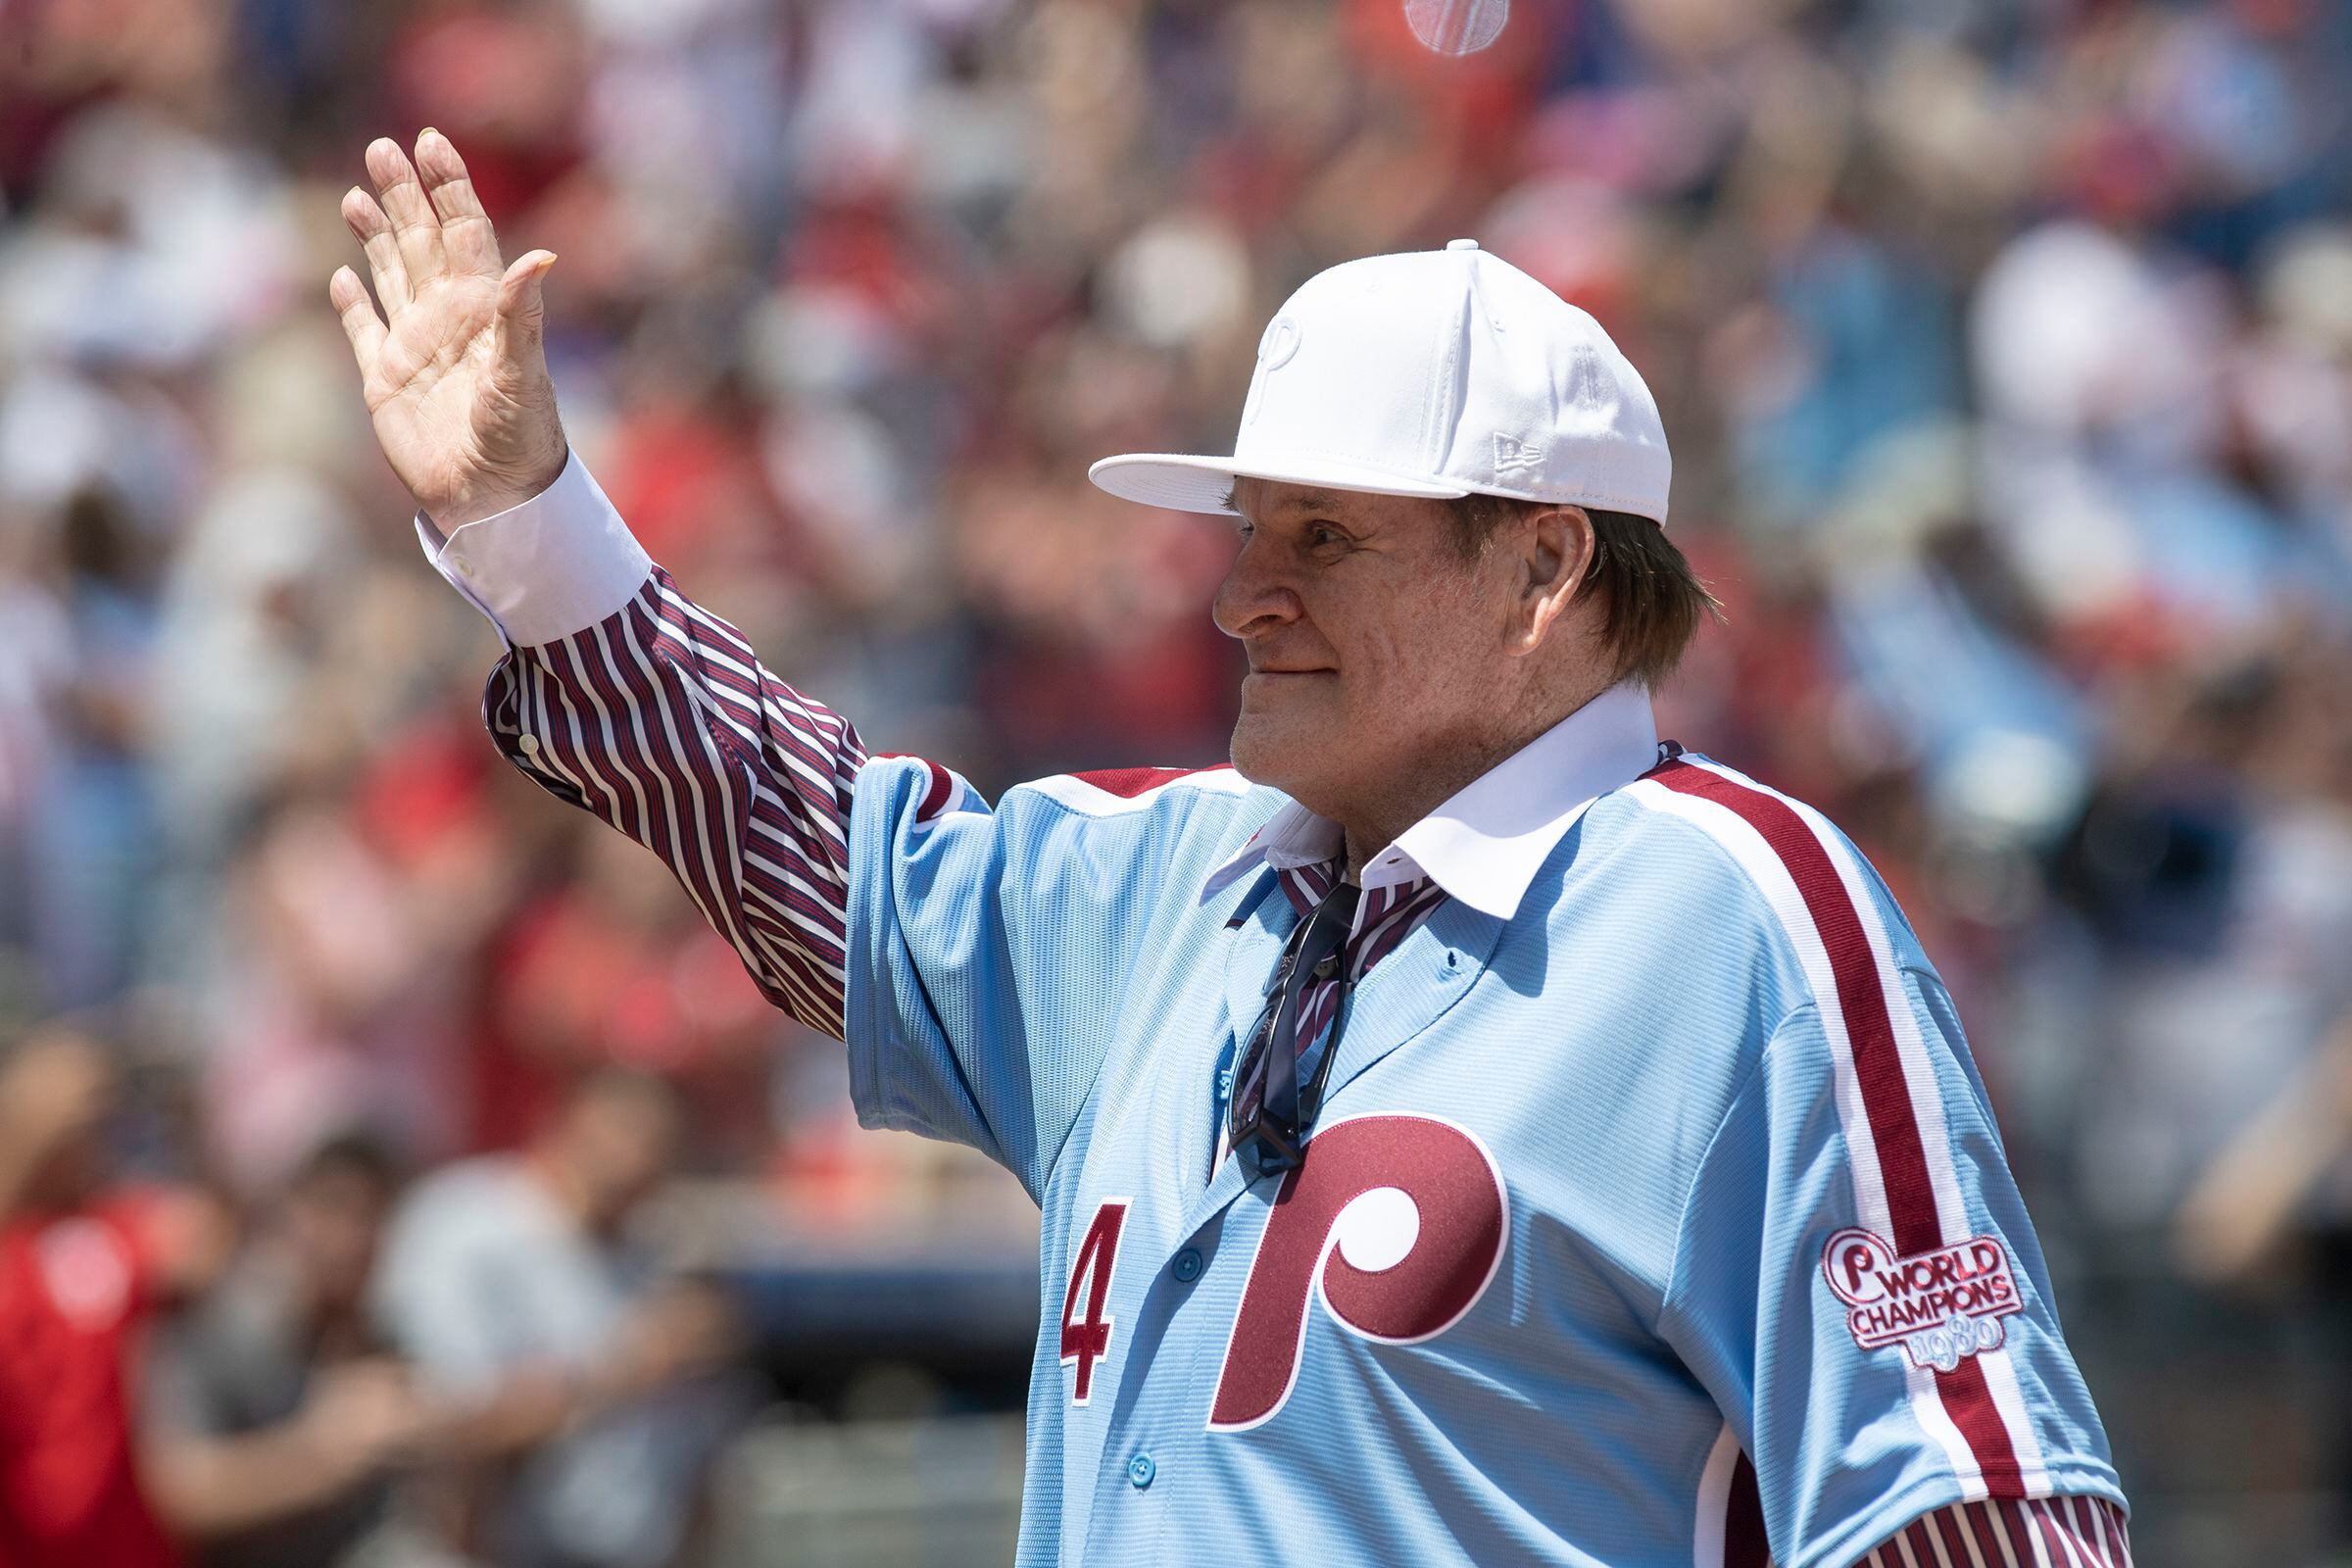 Phillies didn't have to bring back Pete Rose. But they could make